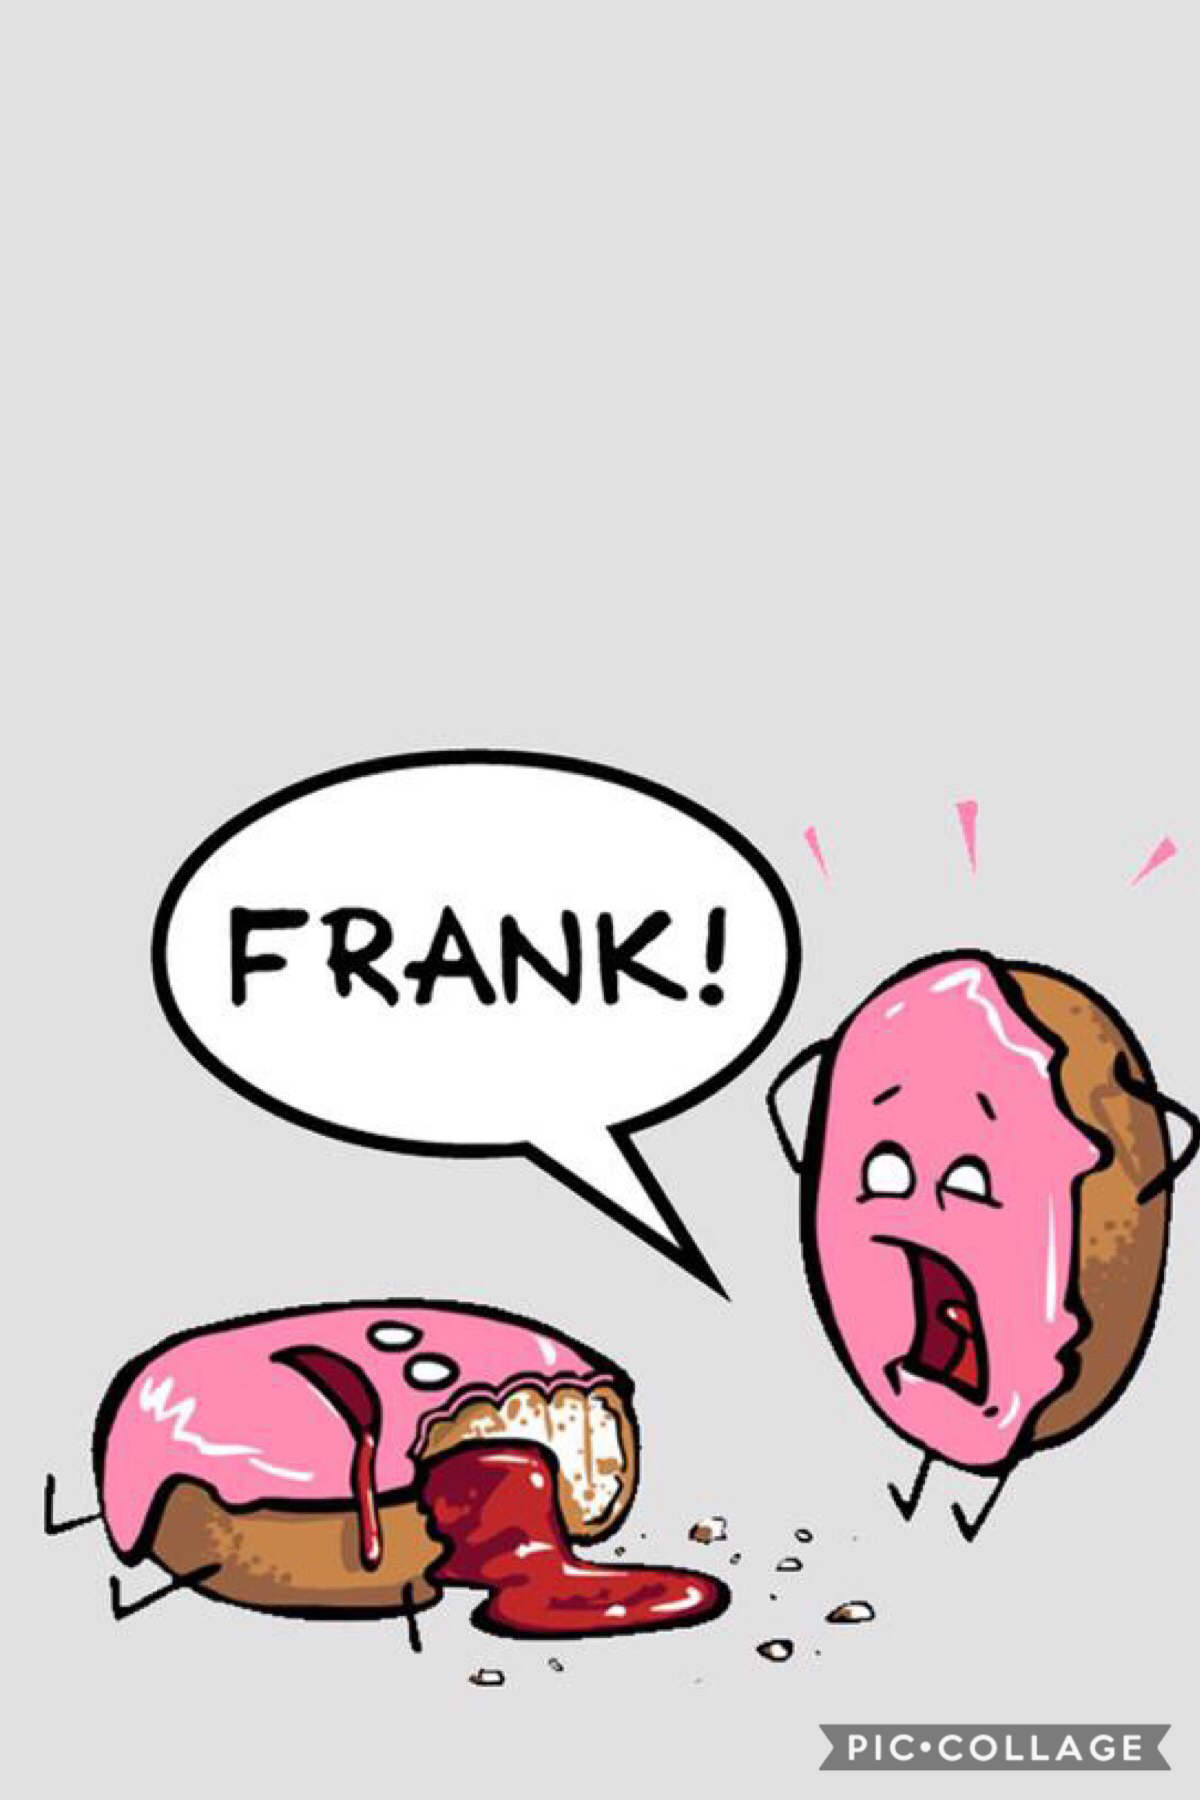 😭tap😭

😂Oh no!!!😂
Frank died 